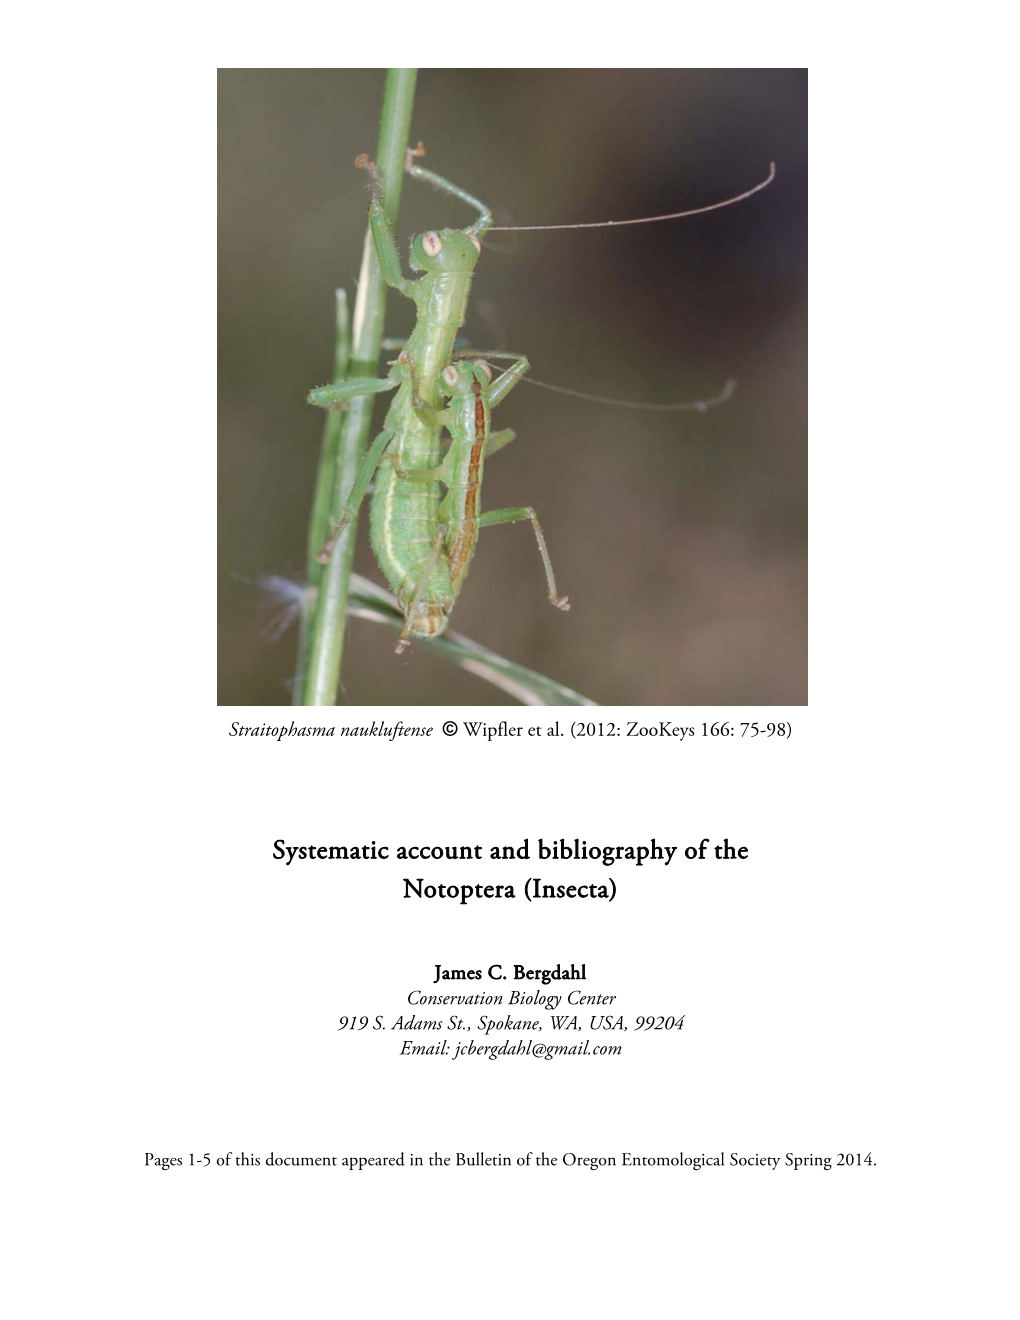 Systematic Account and Bibliography of the Notoptera (Insecta)